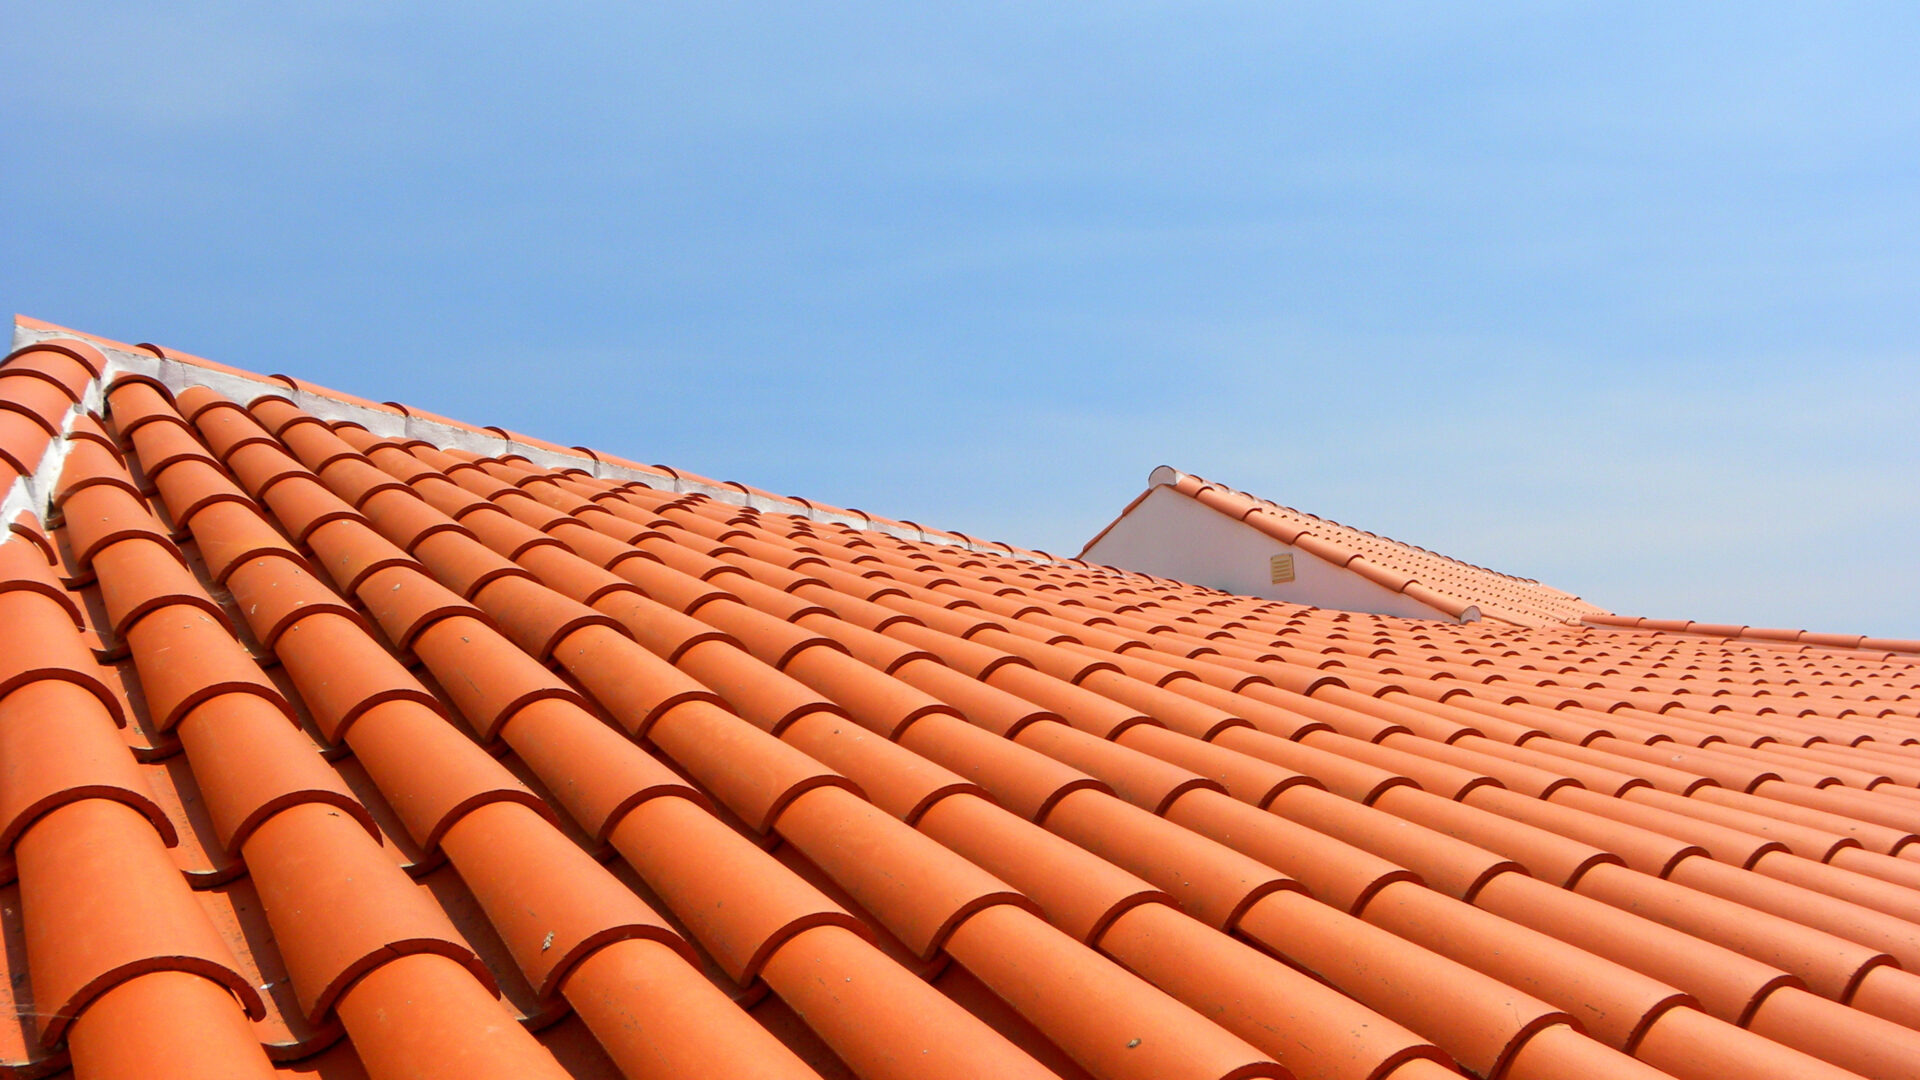 A red tile roof